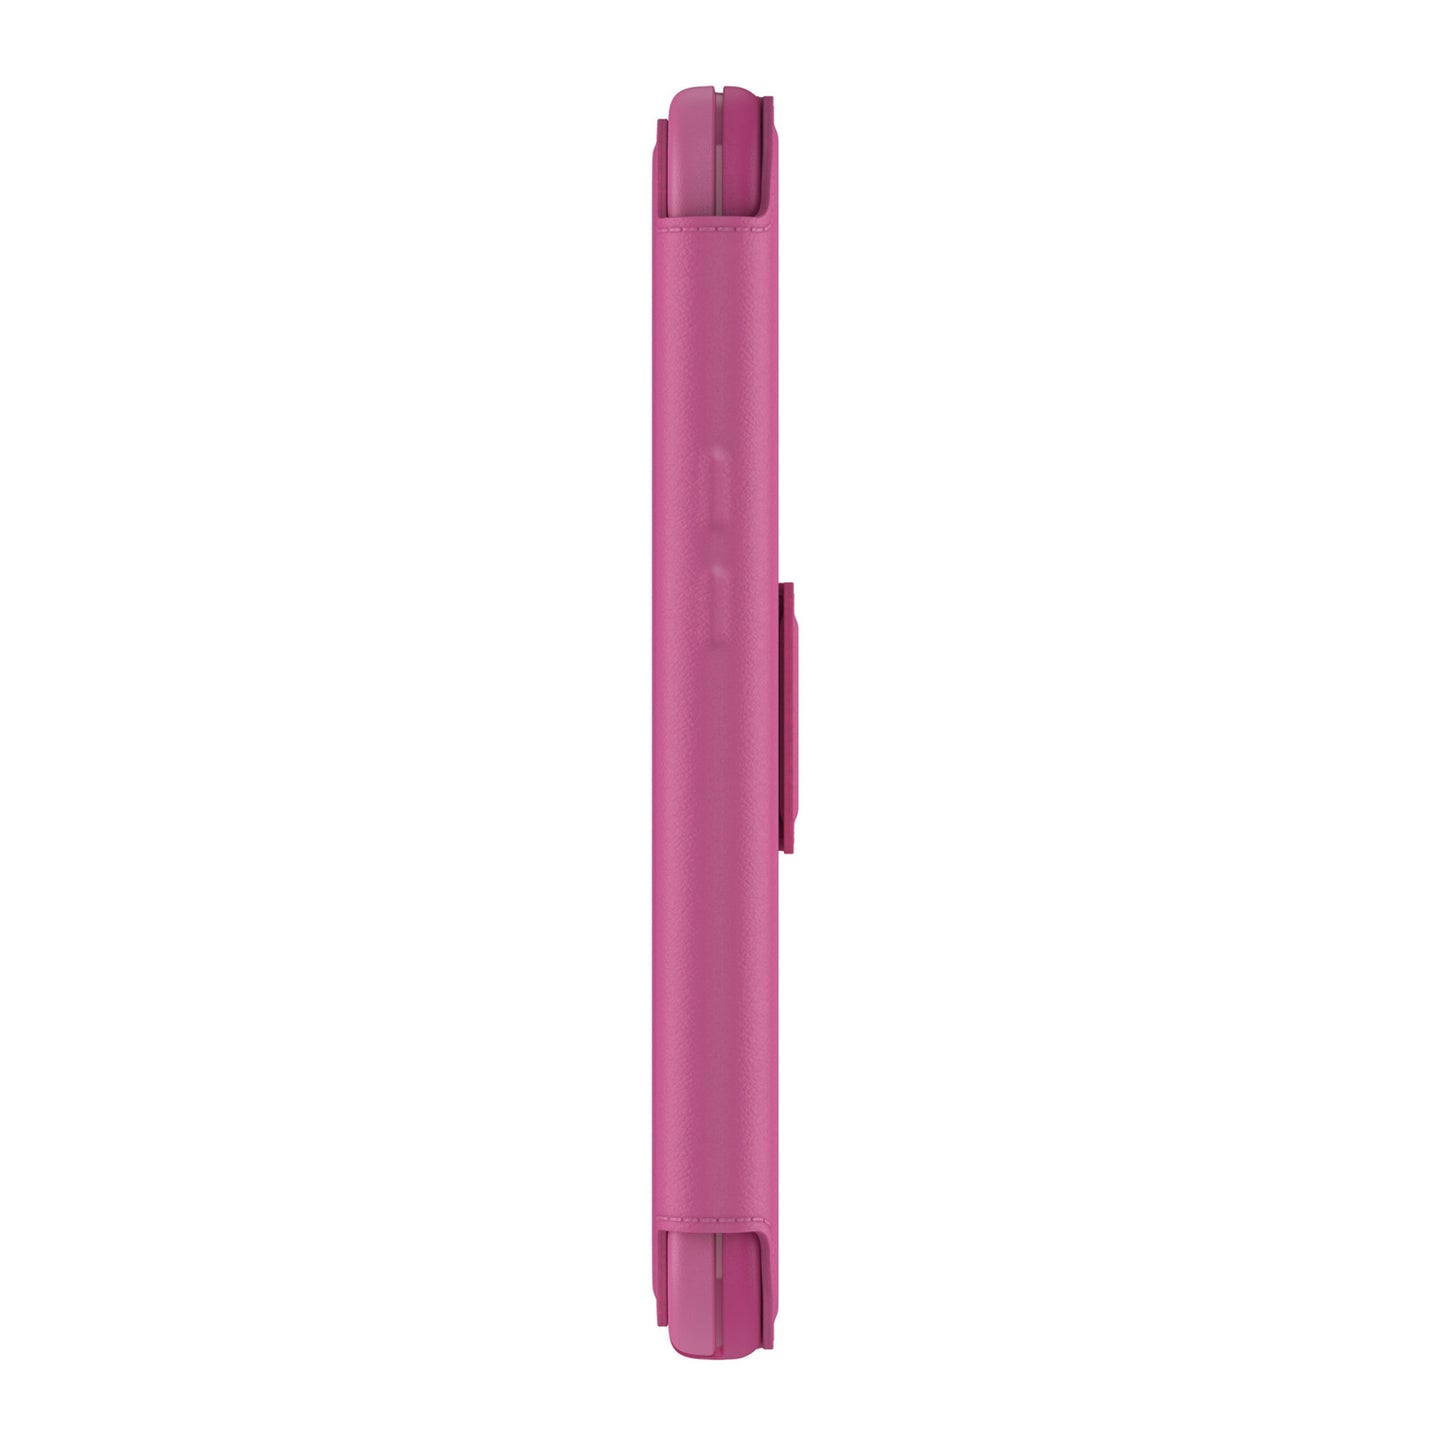 iPhone 13/13 Pro Otterbox MagSafe Folio Attachment - Pink (Strawberry Pink) - 15-09660